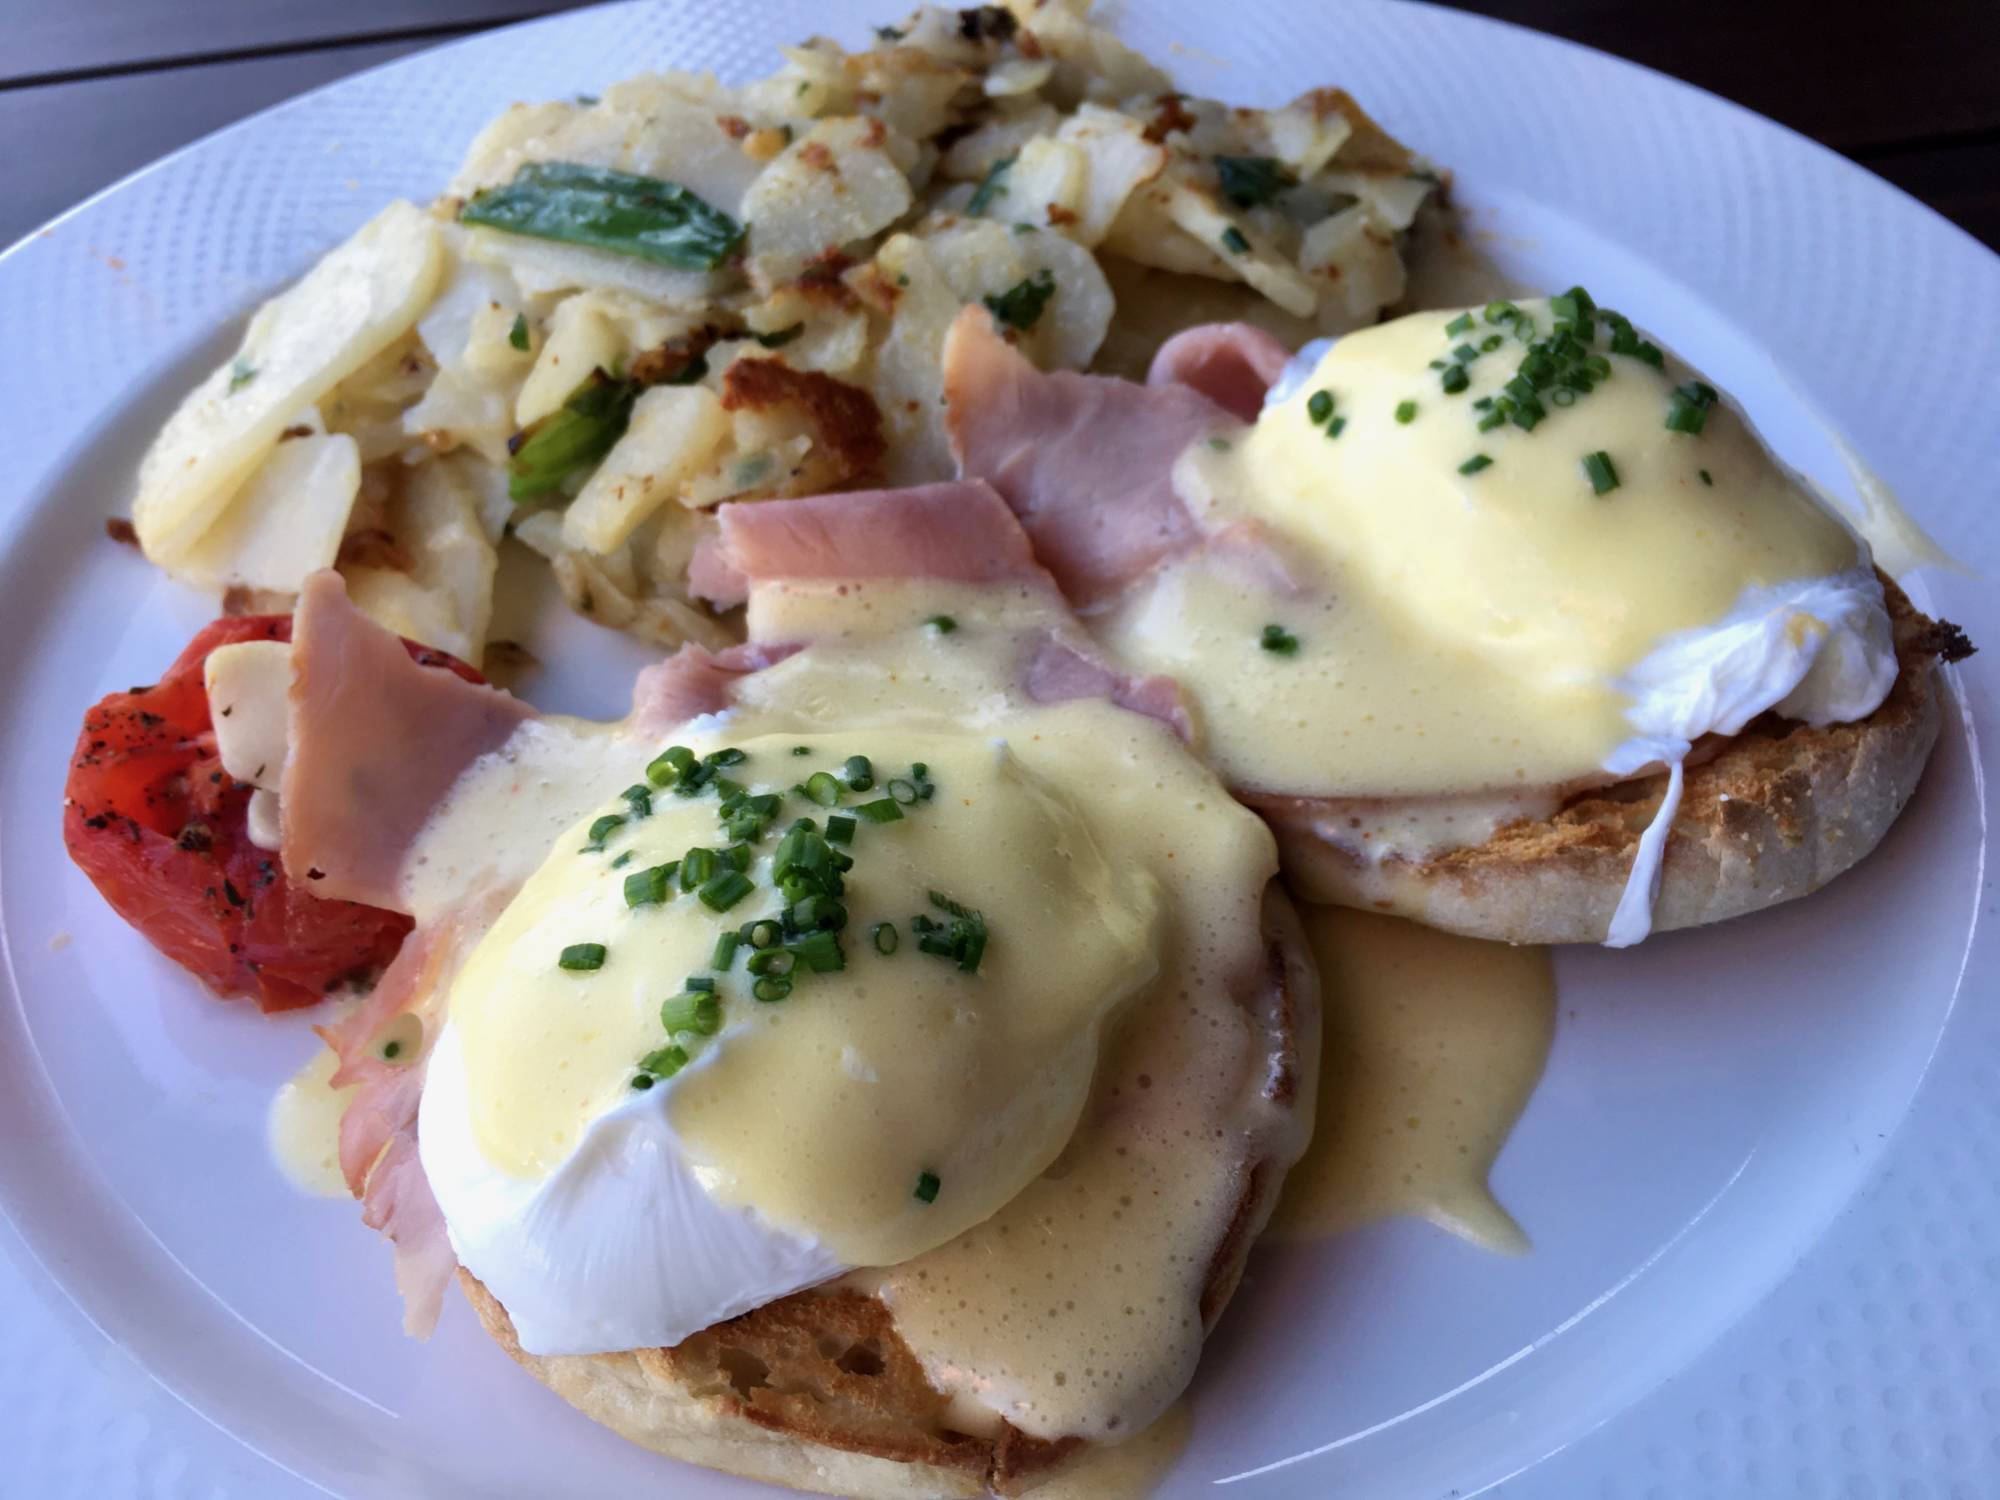 The country Eggs Benedict at Town in San Carlos.